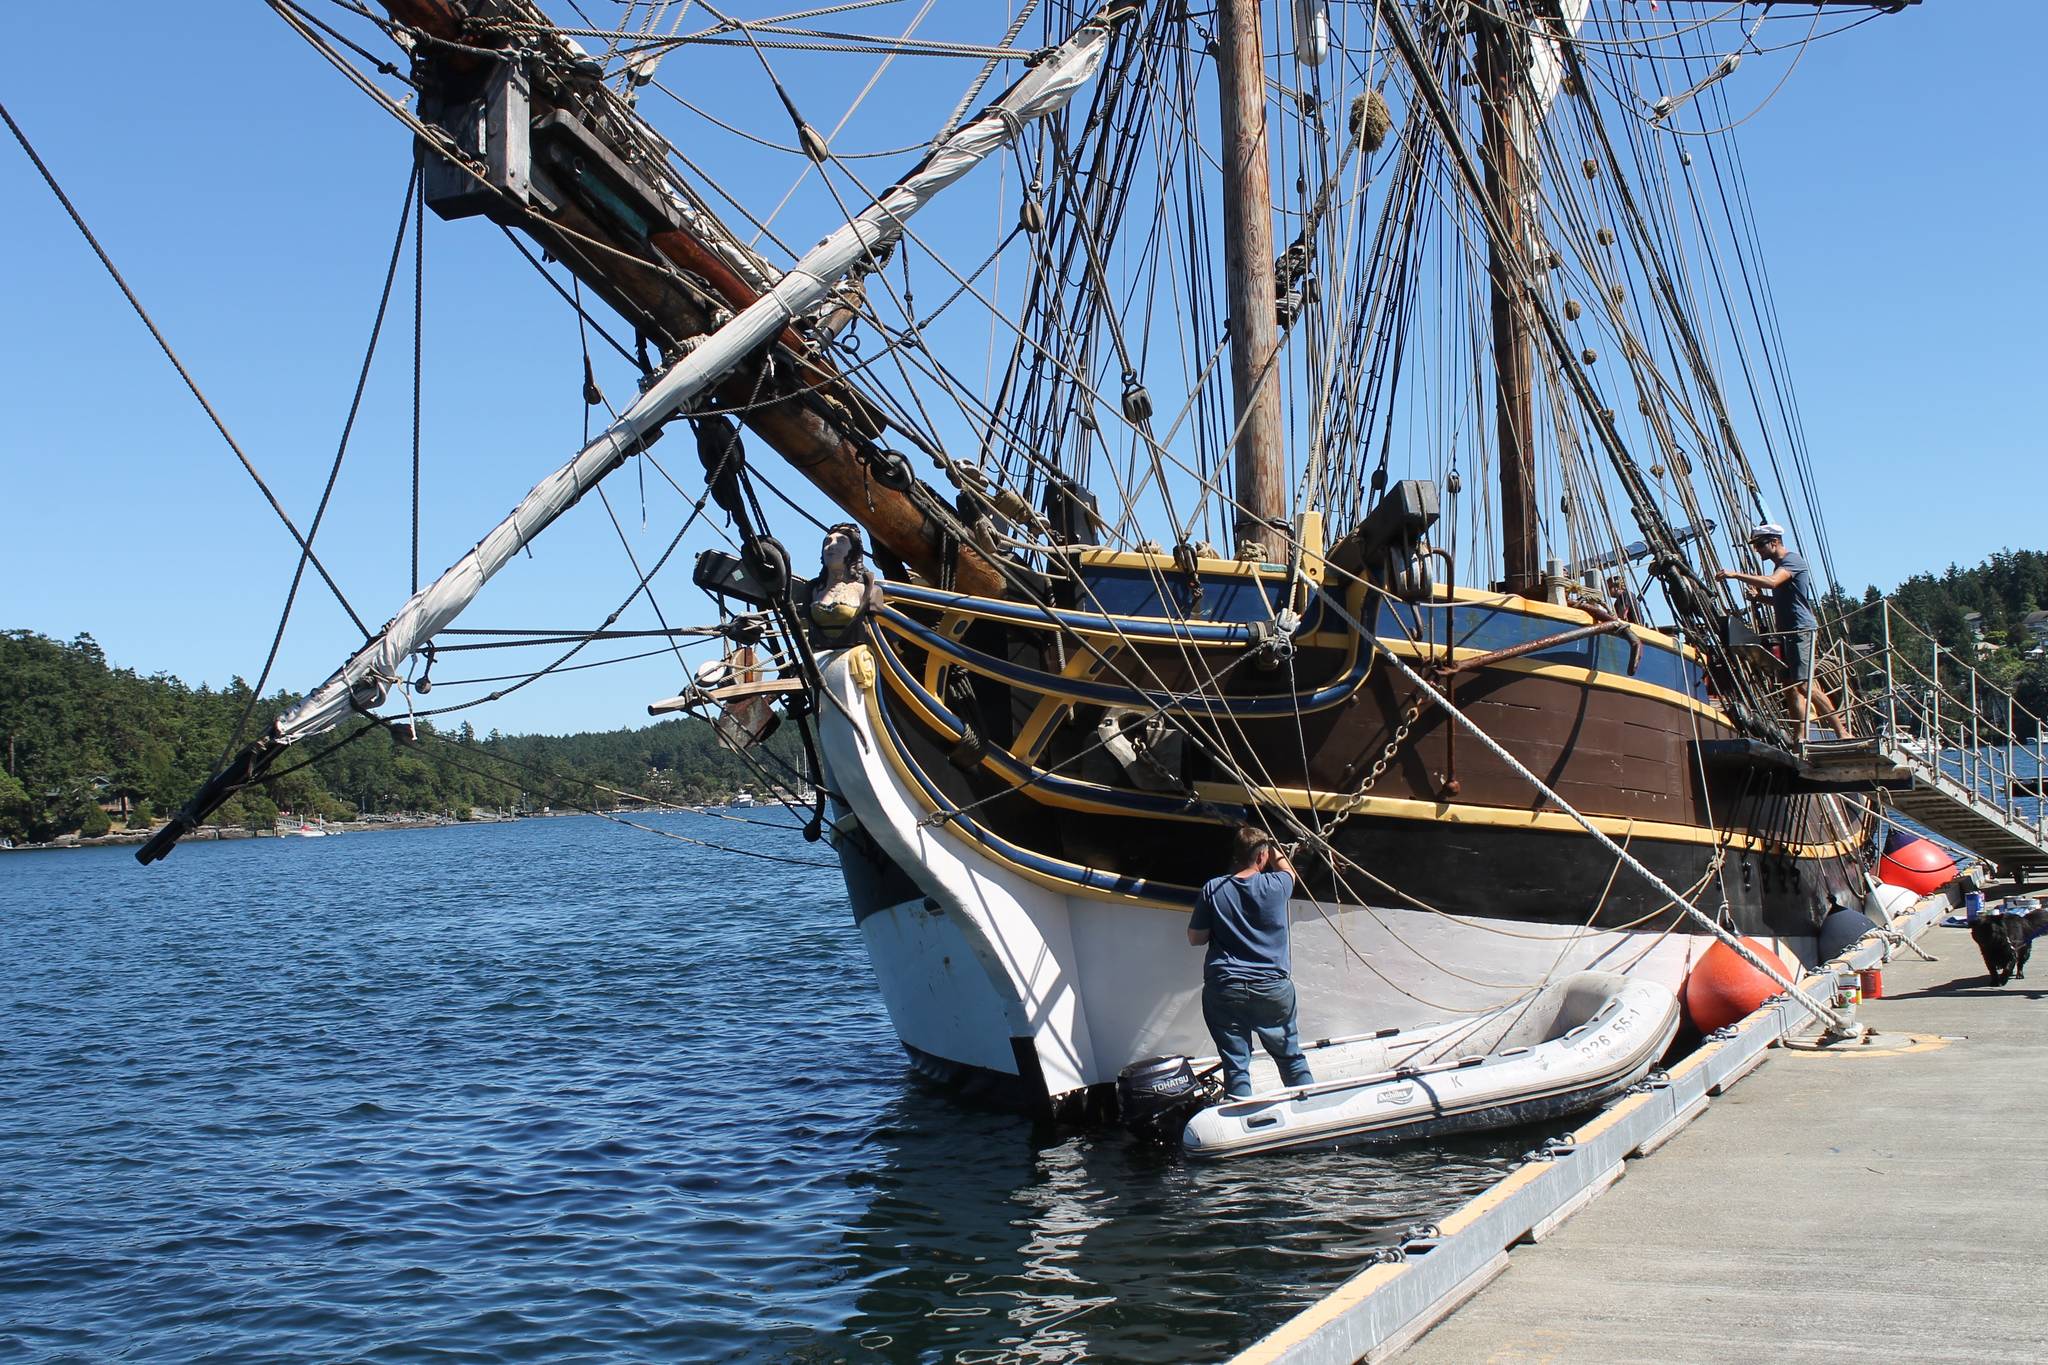 Staff photo/Hayley Day                                Pirate ships are docked at the Port of Friday Harbor from Friday, June 23 through Sunday, June 25.